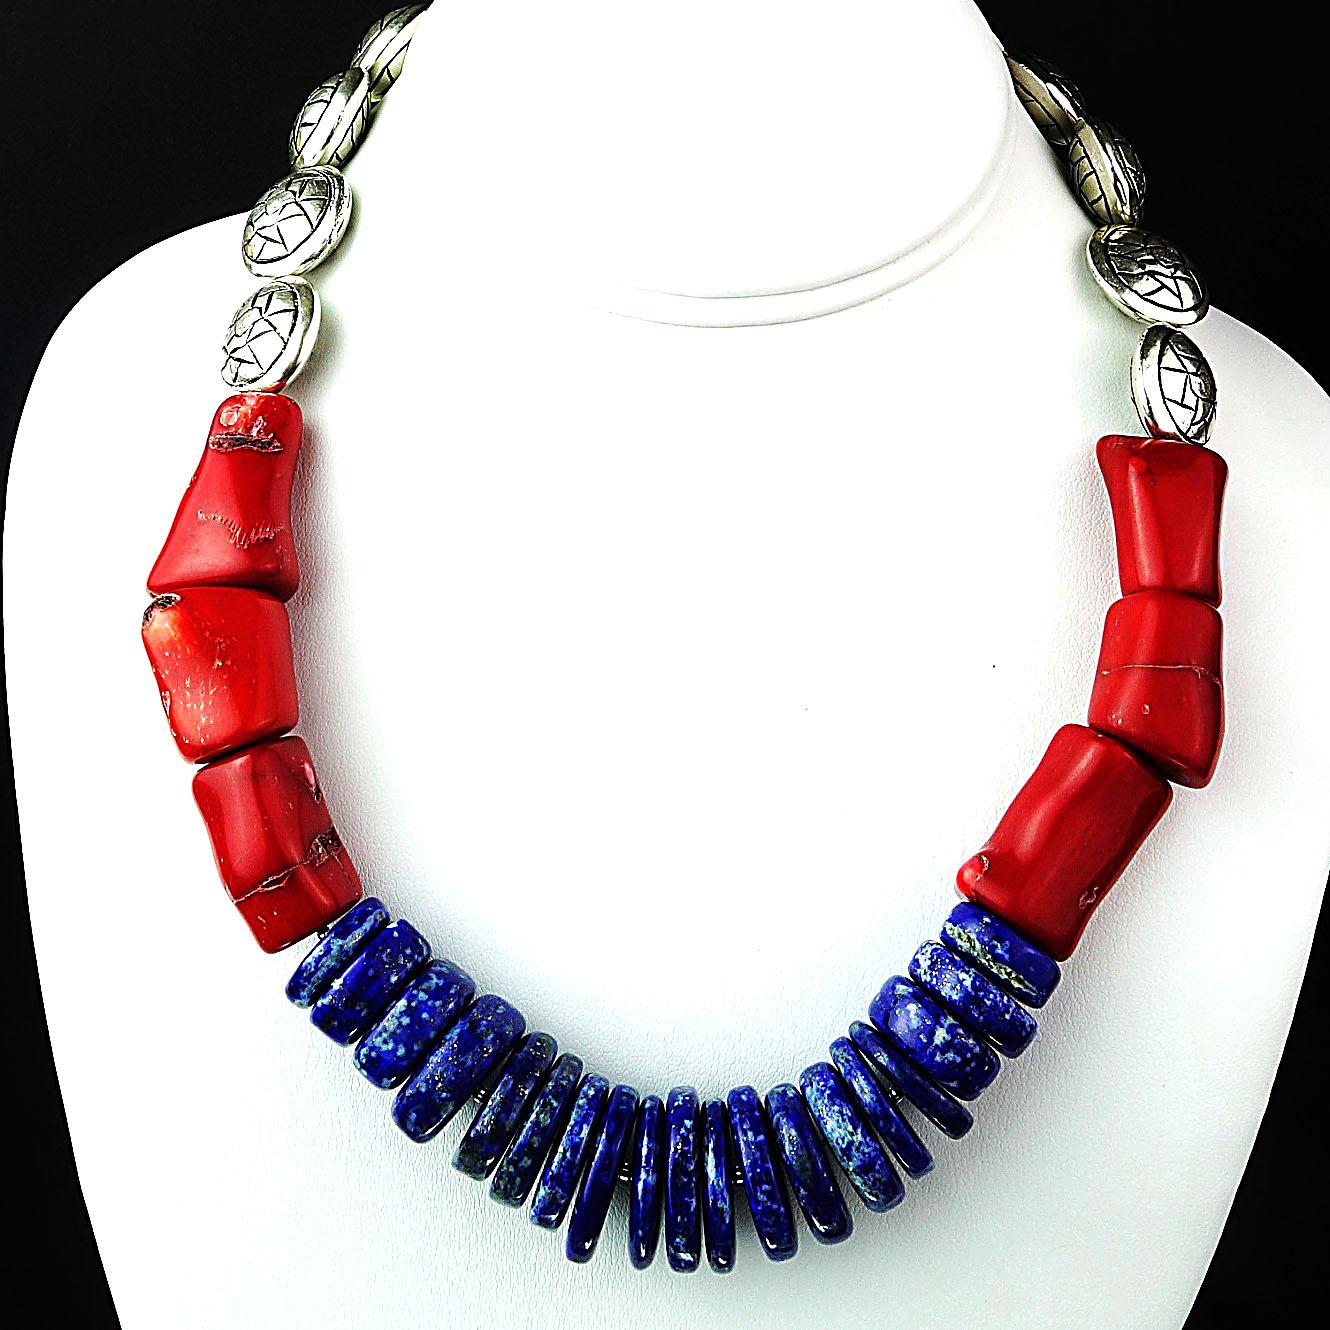 Women's AJD Stunning Lapis Lazuli, Coral and Silver Necklace